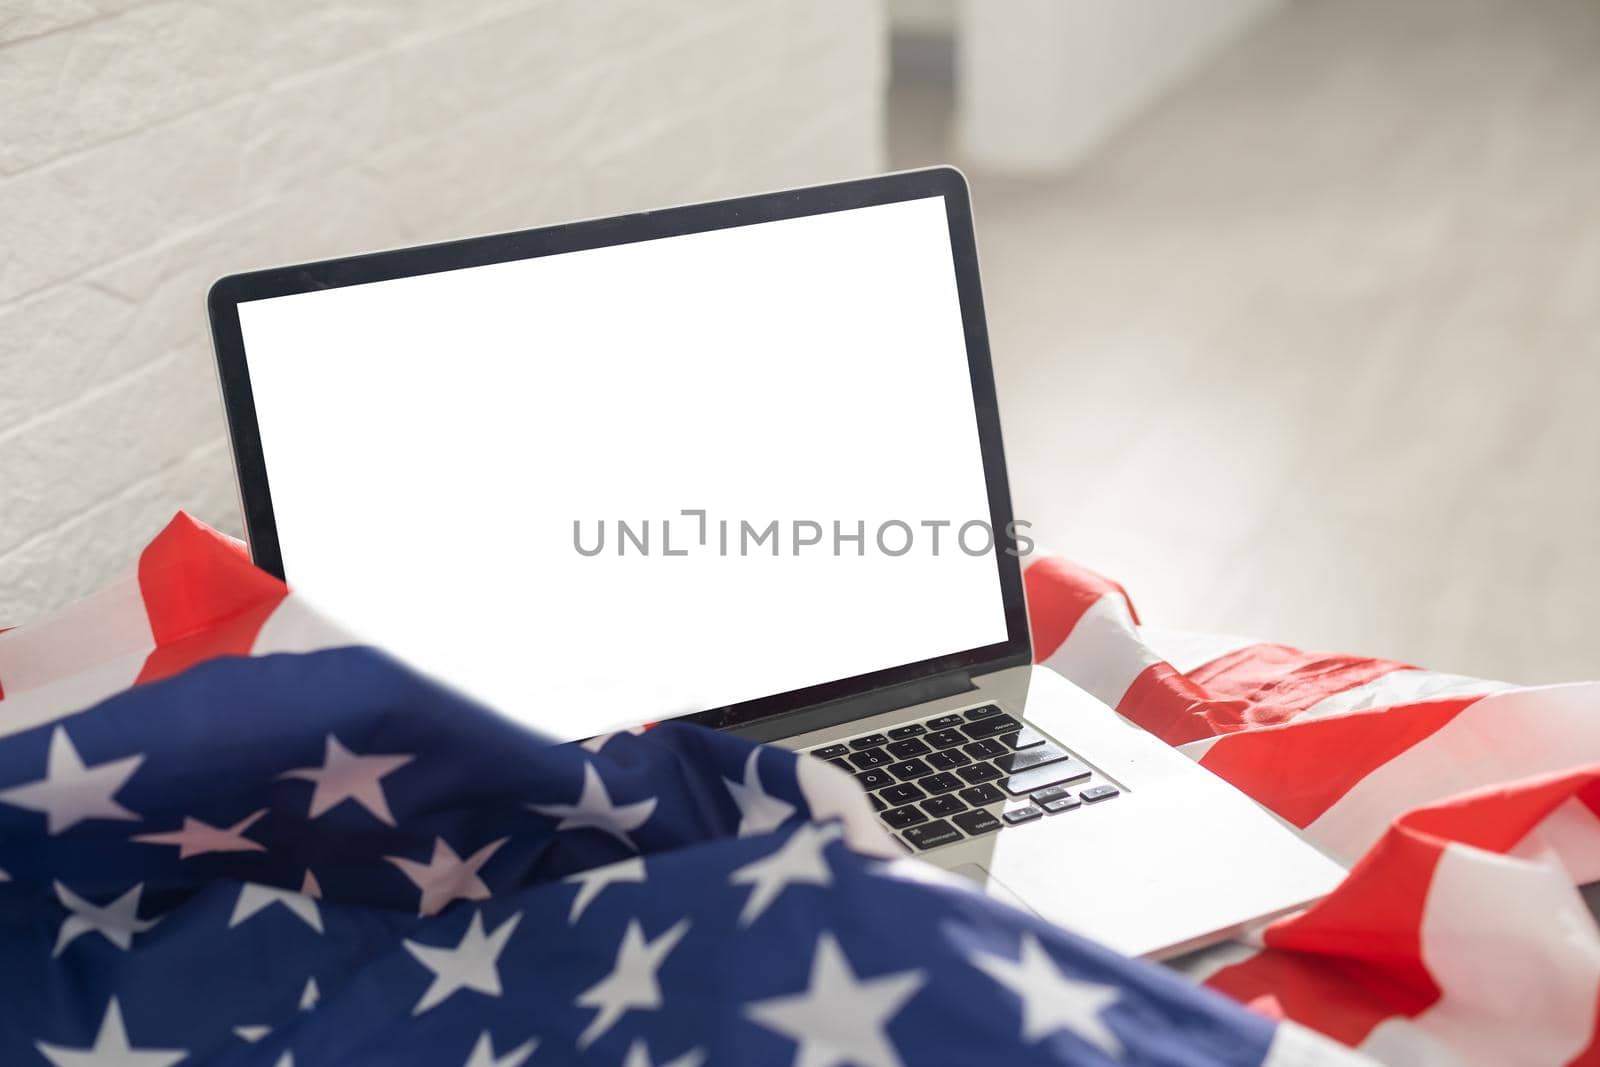 Laptop with blank screen and USA flag.